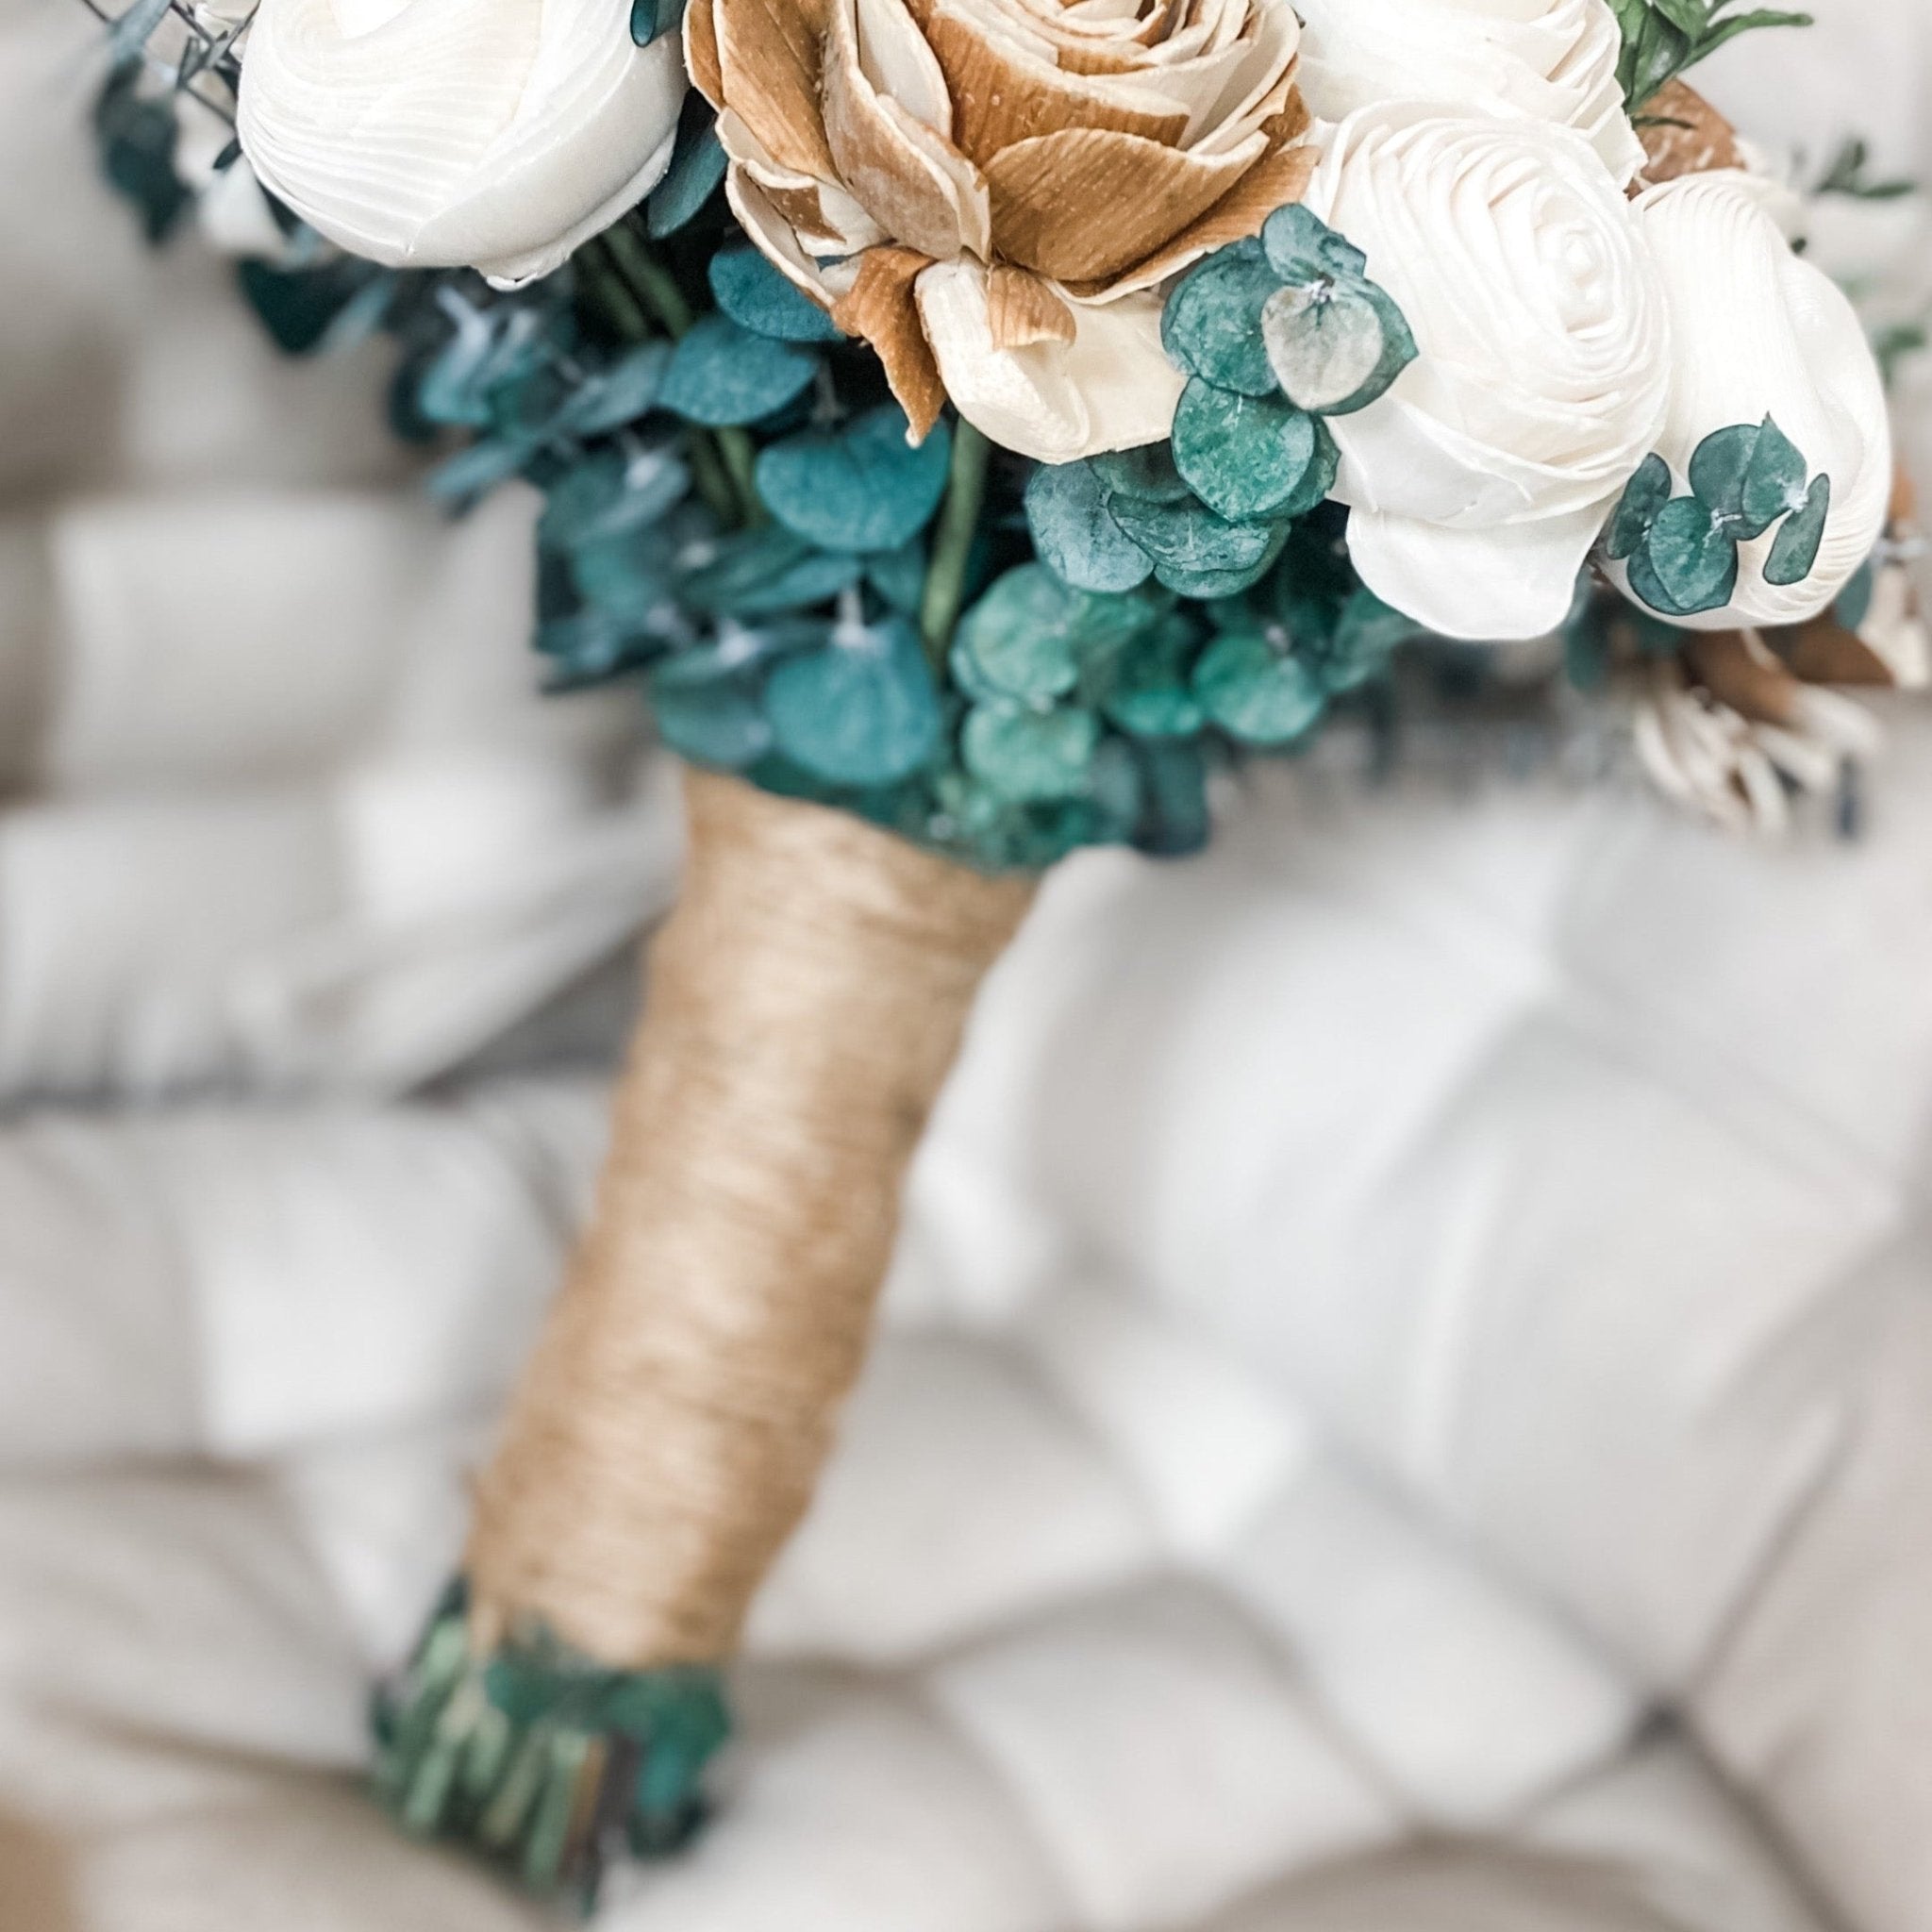 Rustic Woodland Charm, Ivory and Raw Sola Wood Bouquet with Greenery - PapiroExtra Large 12" Bride